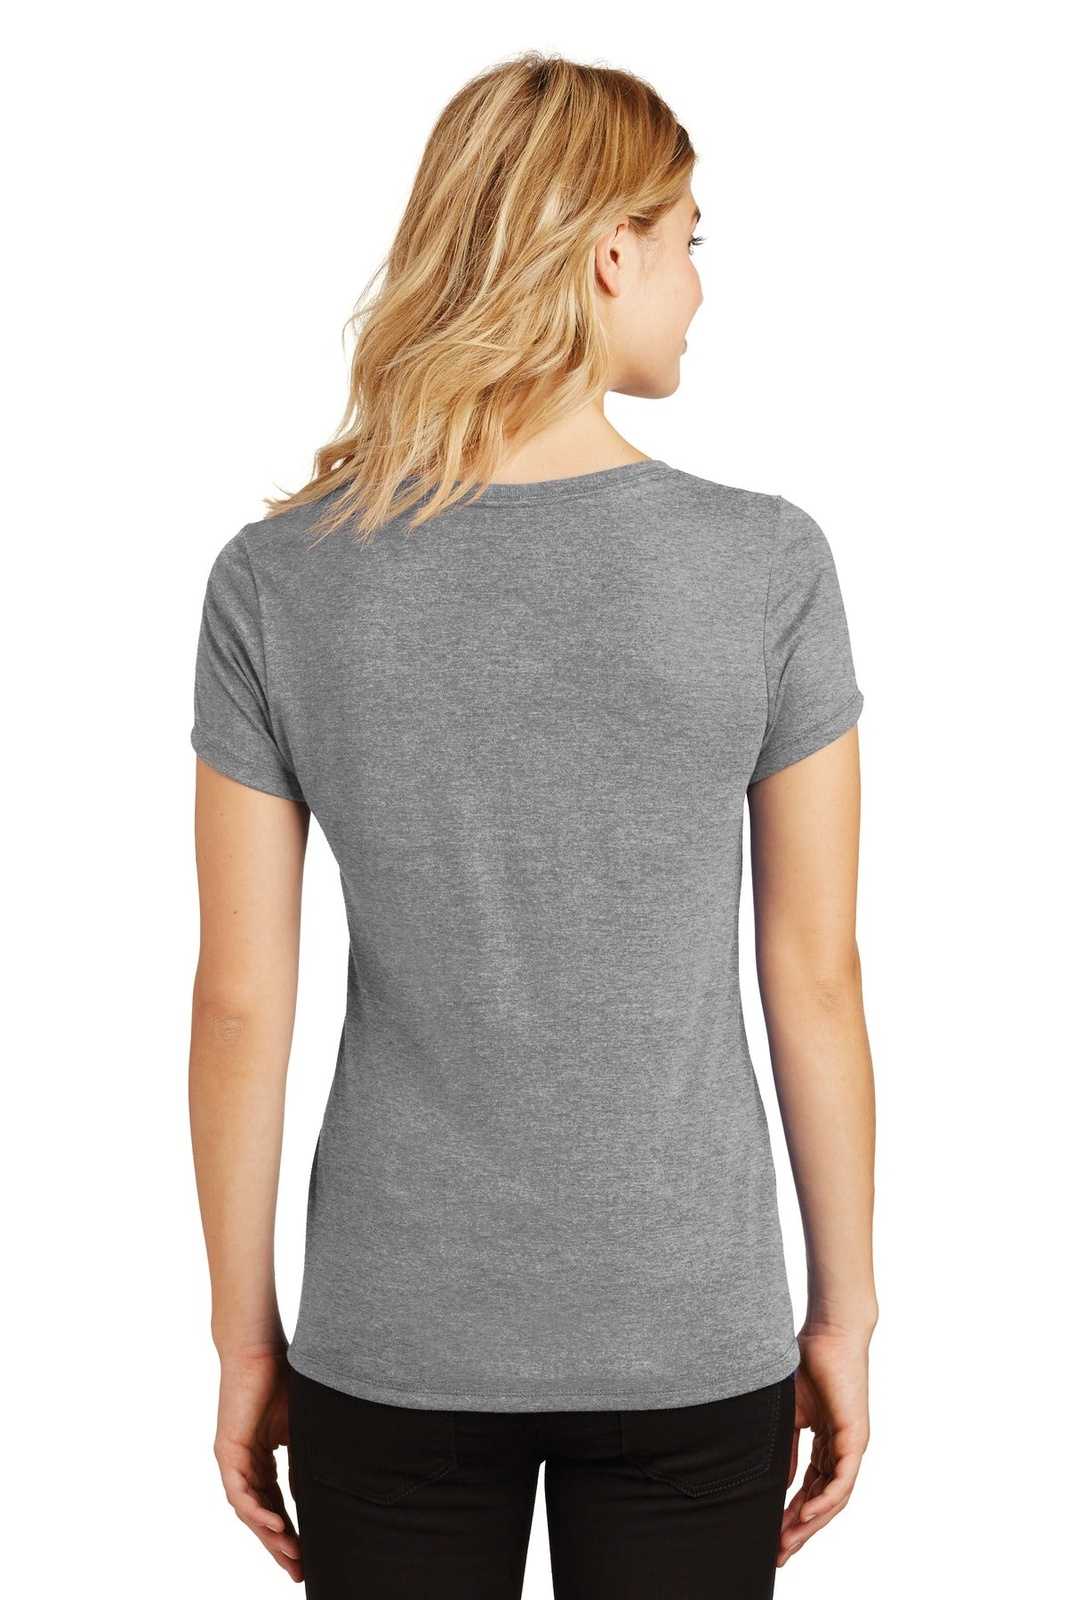 District DM1350L Women's Perfect Tri V-Neck Tee - Gray Frost - HIT a Double - 1